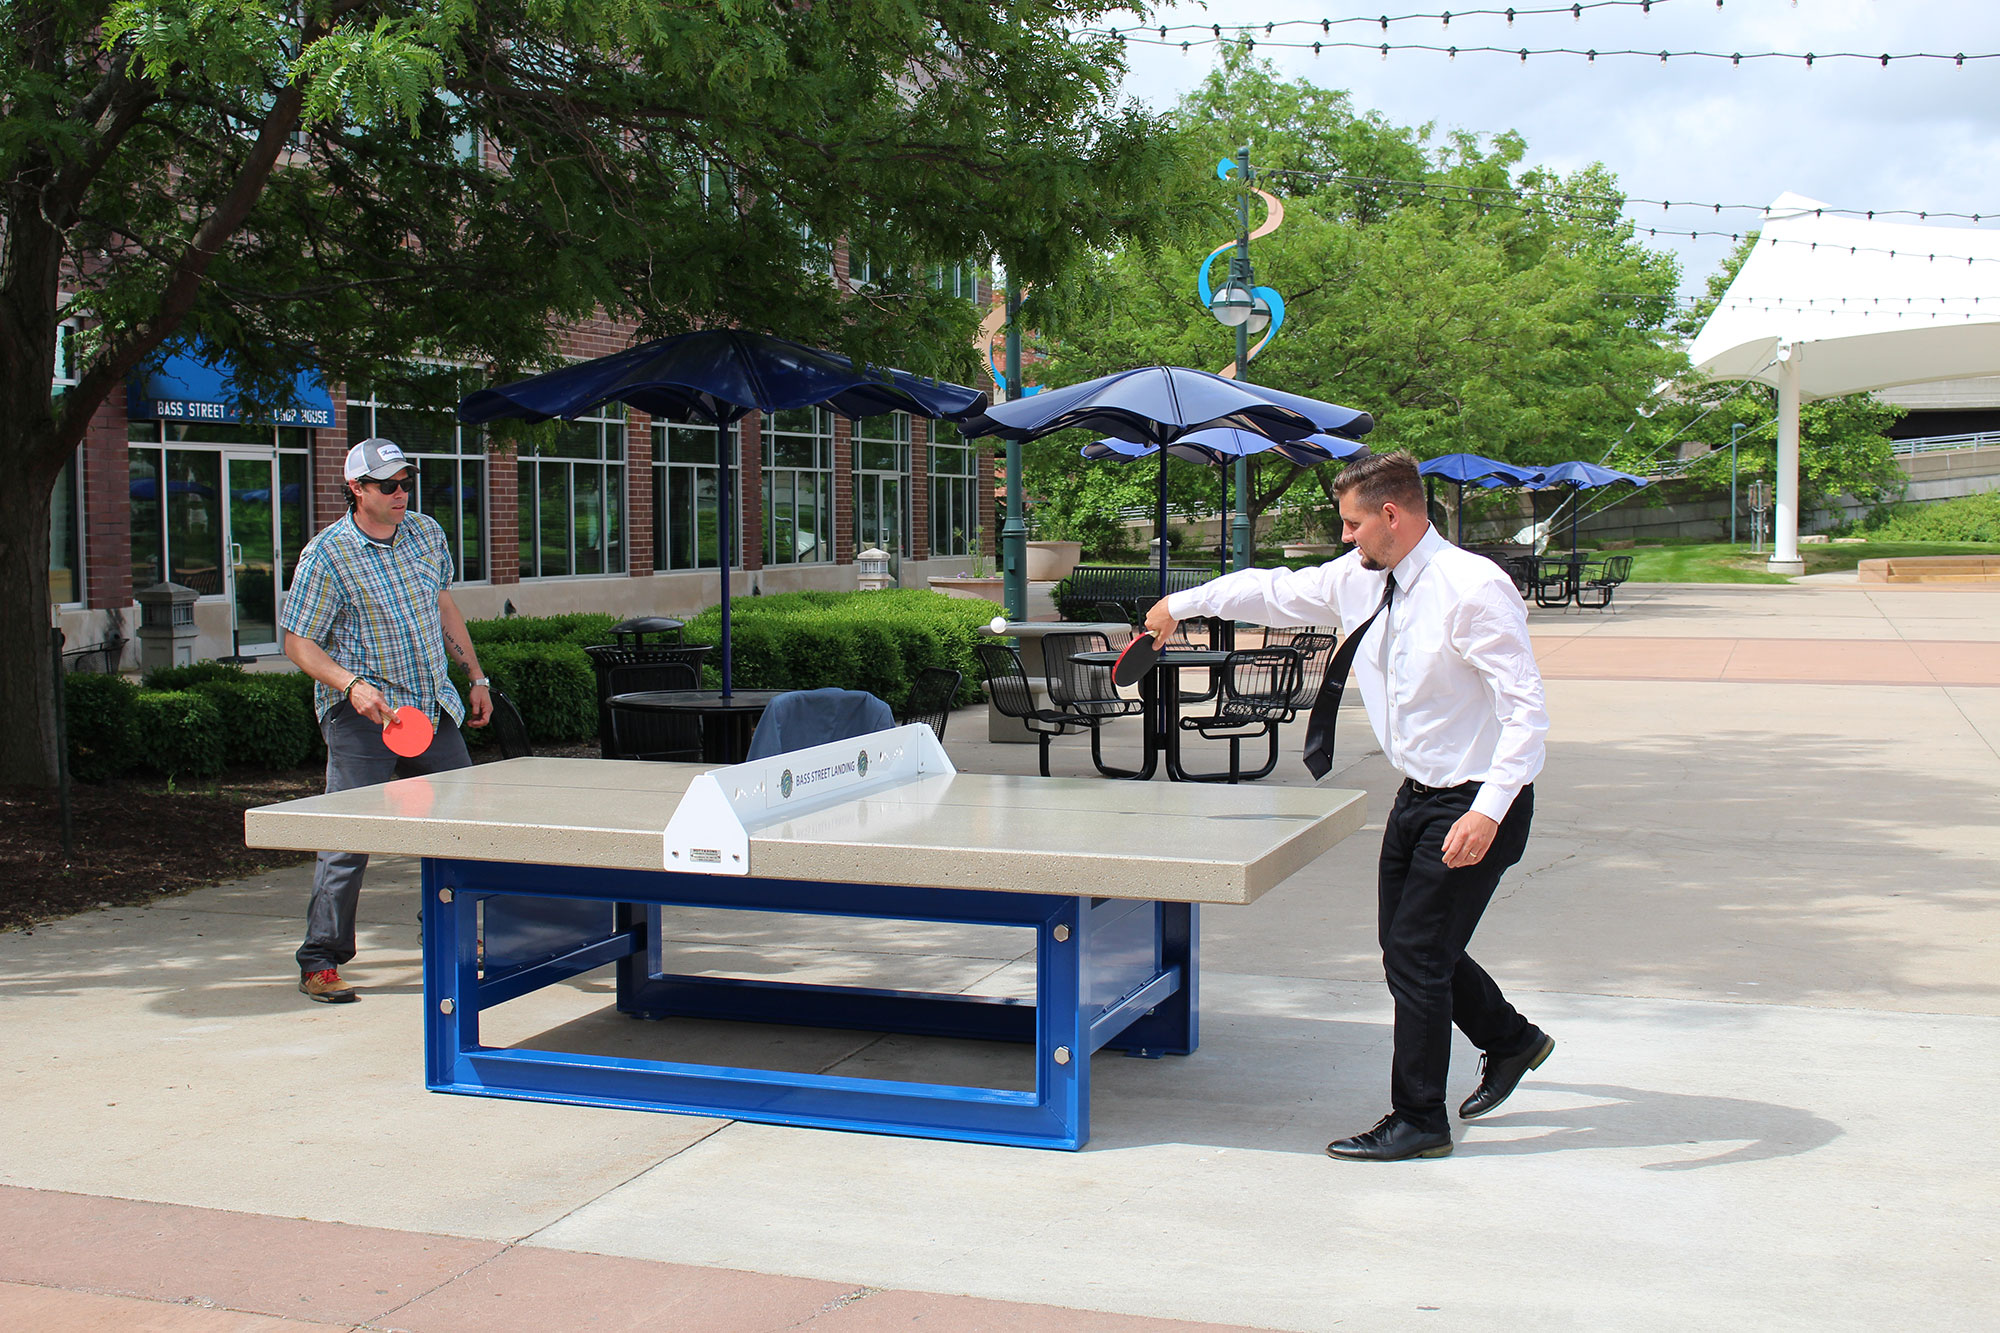 Outdoor Concrete Table Tennis/ping pong table with steel base